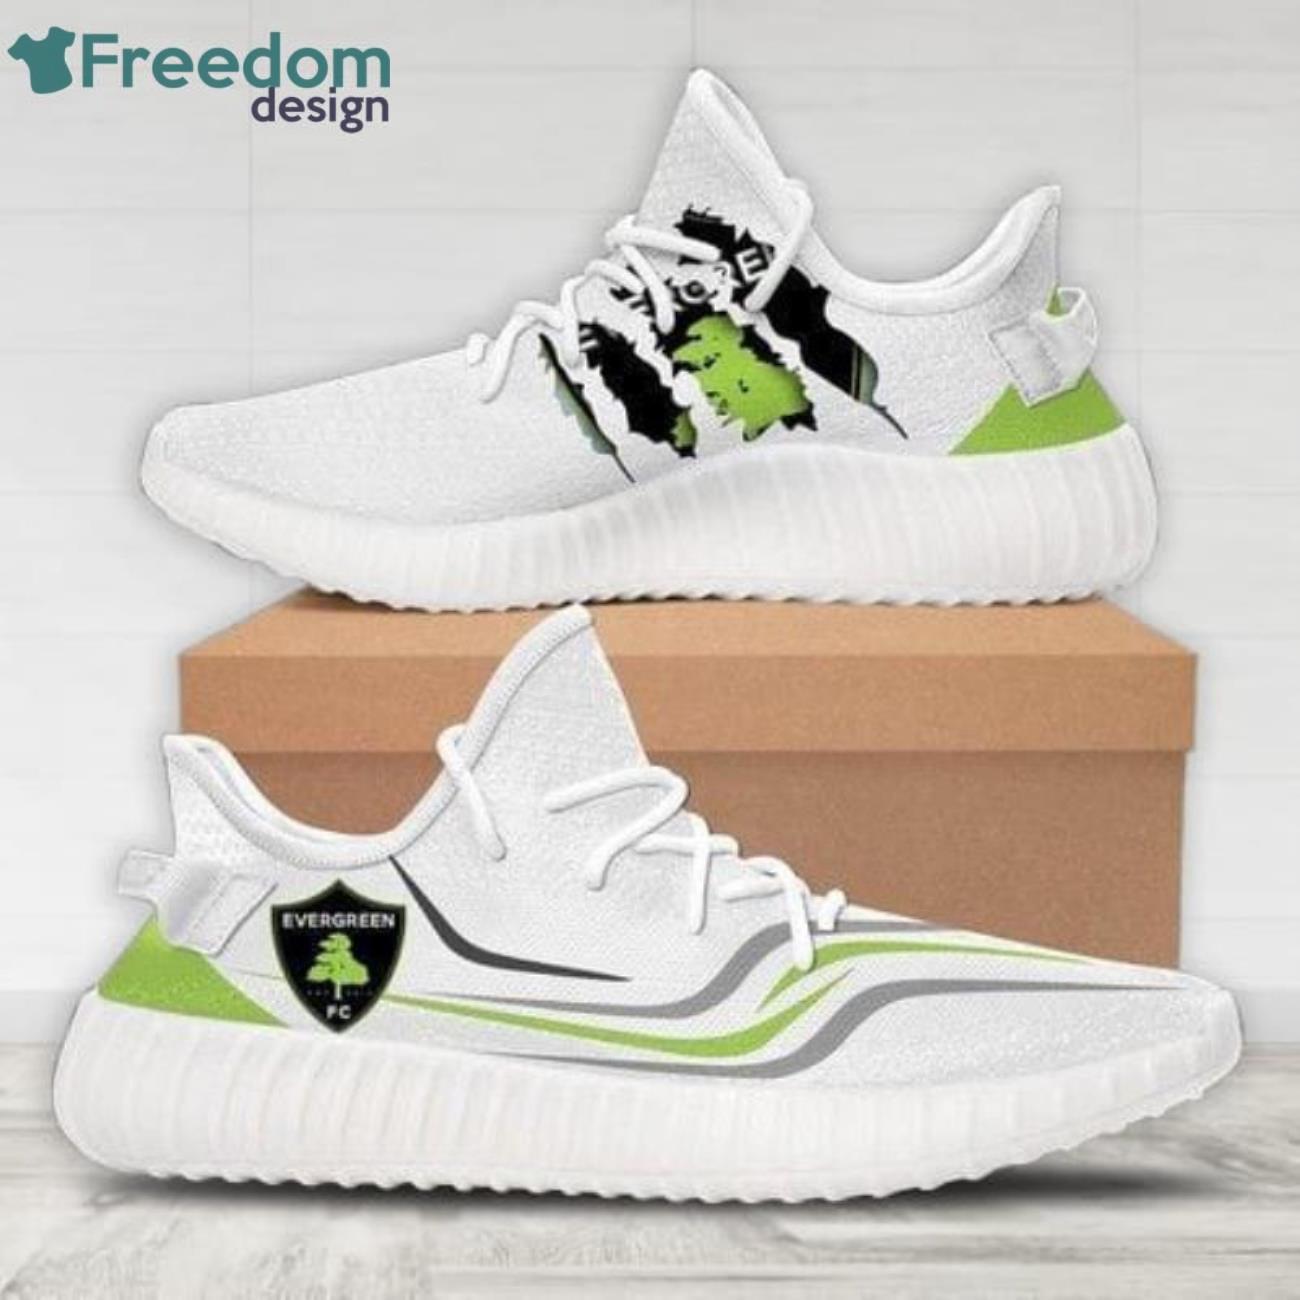 Evergreen Fc Usl League Yeezy Sneaker Shoes Product Photo 1